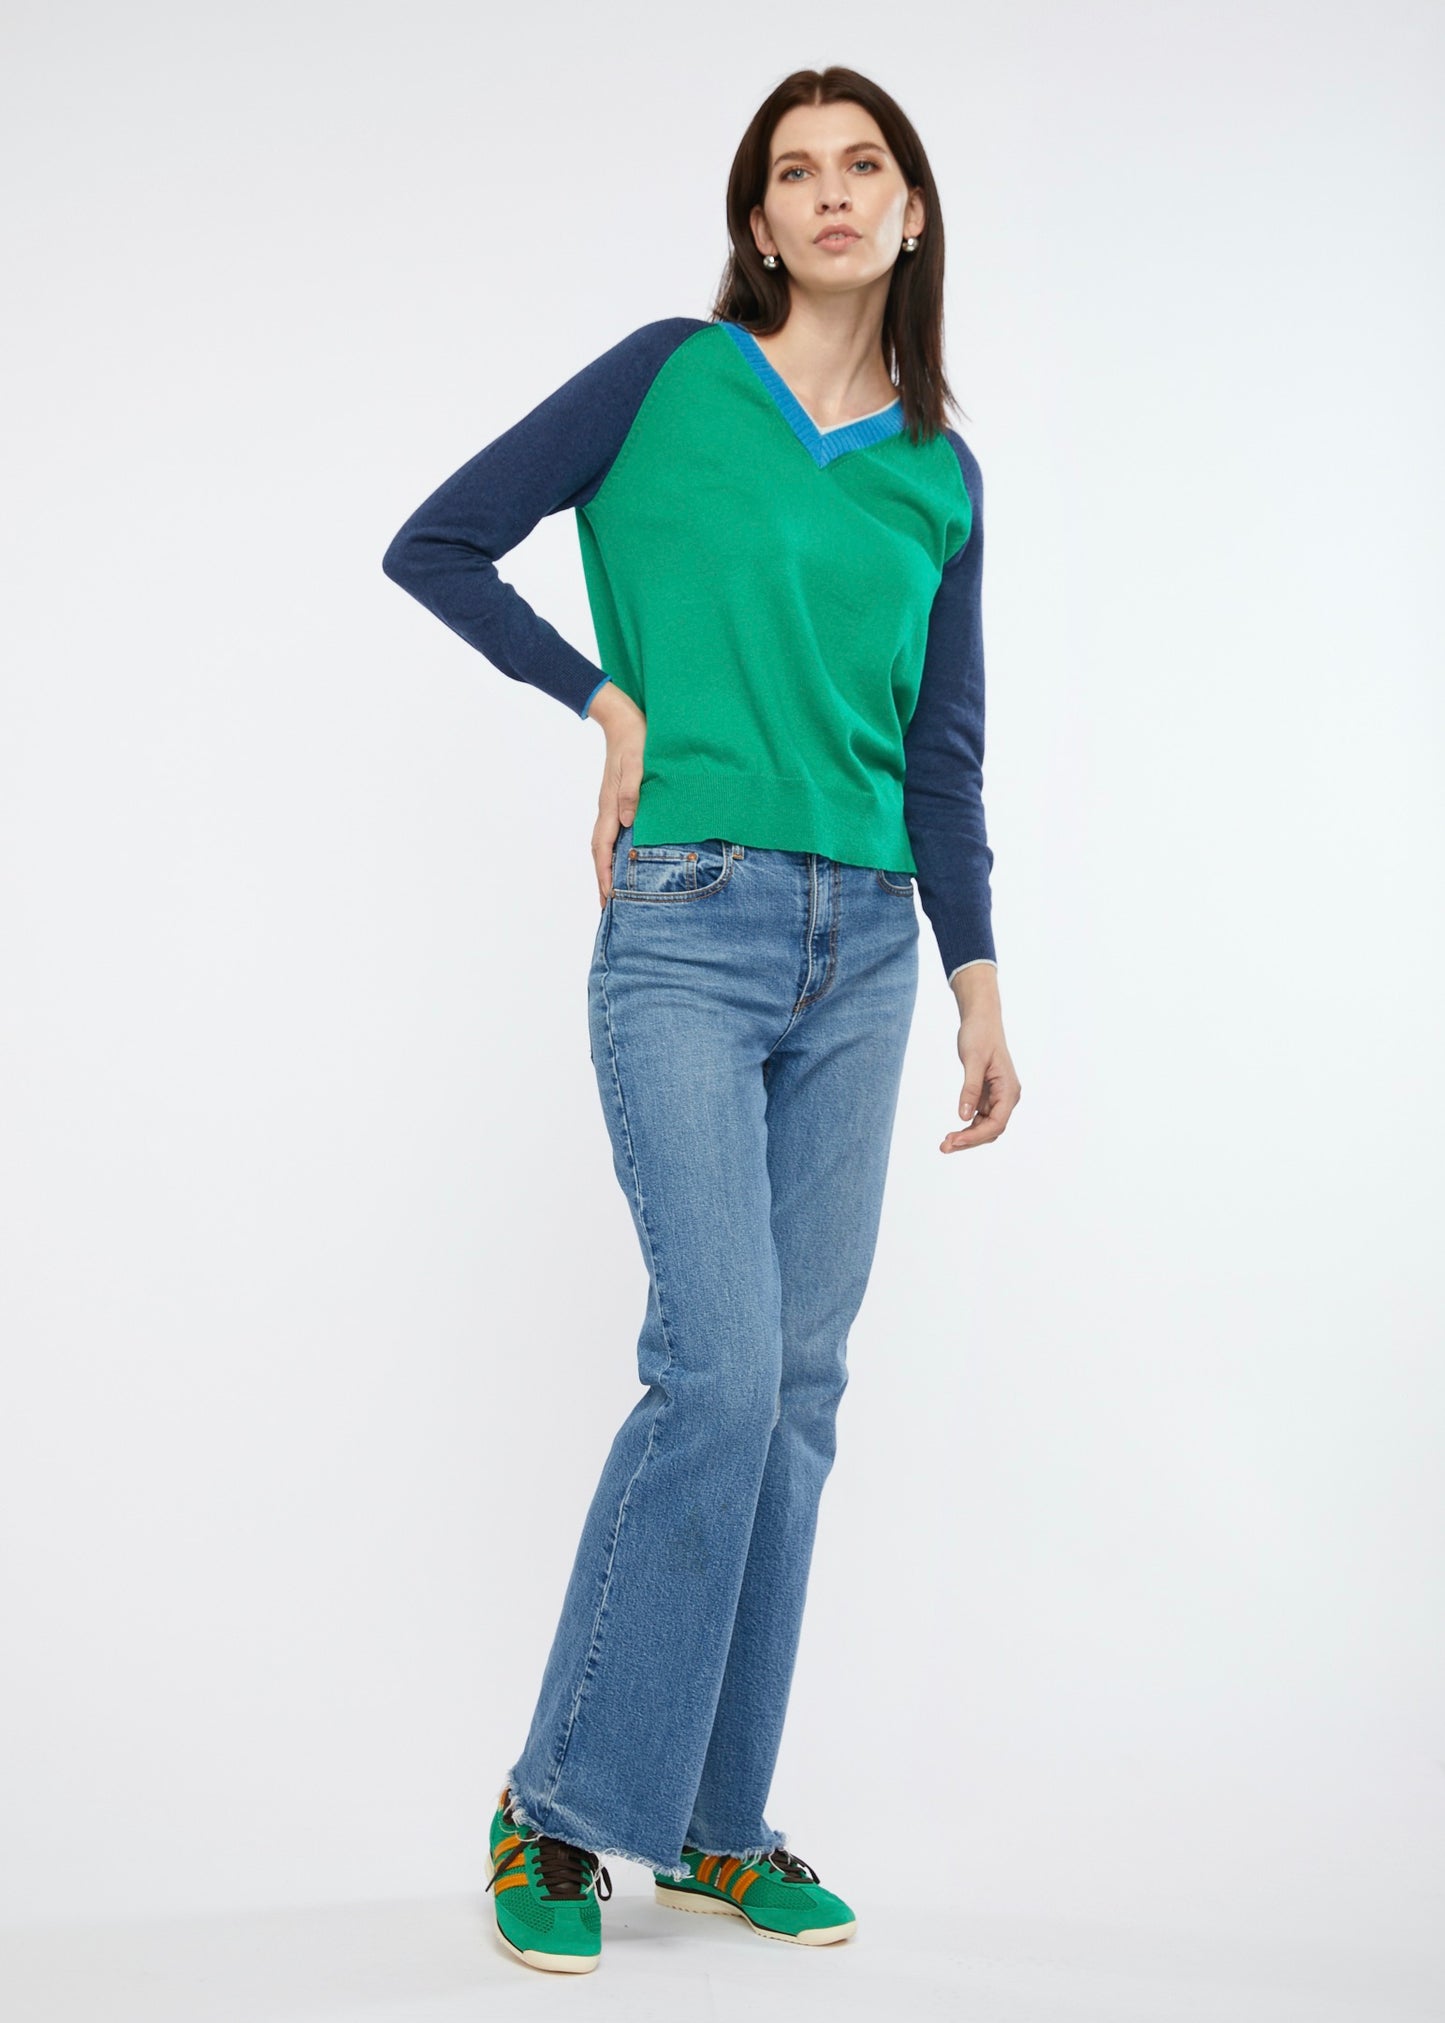 
                  
                    Fashioned V Neck jumper by Zaket and Plover in Emerald and Navy
                  
                